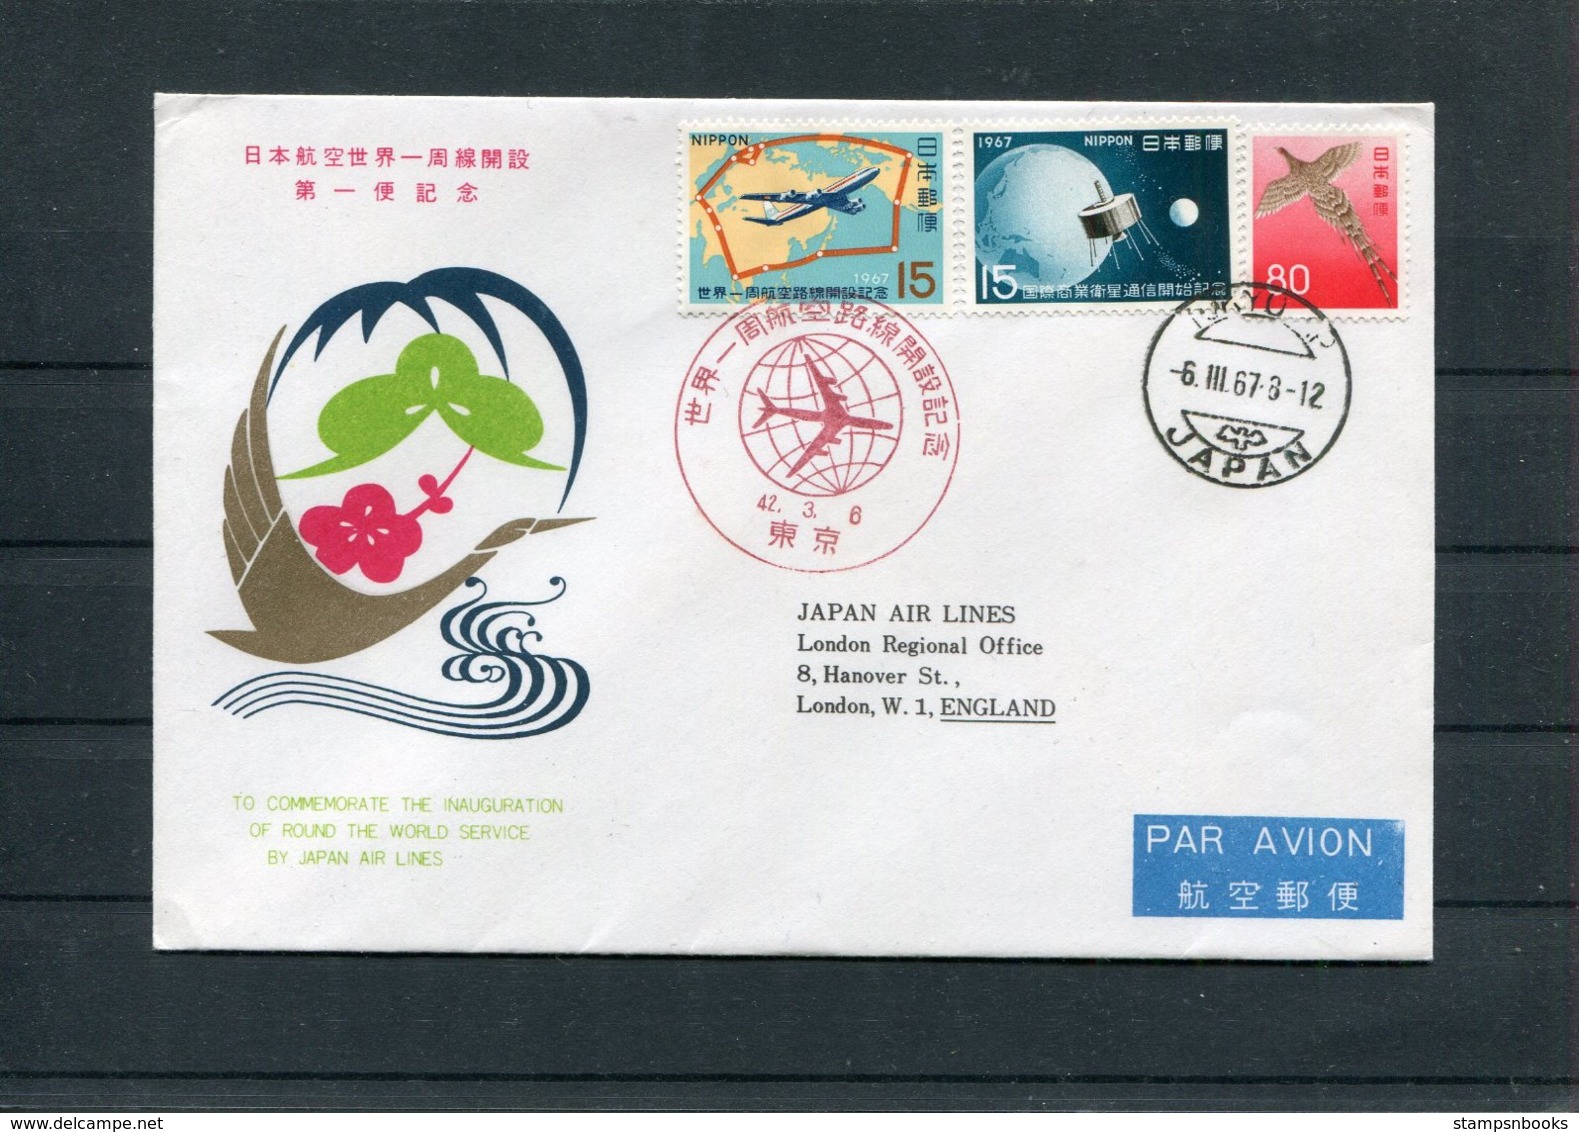 1967 Japan Air Lines X 8 JAL First Flight Cover(s) England, Italy, France, Iran, Egypt, India, Thailand, Hong Kong - Airmail